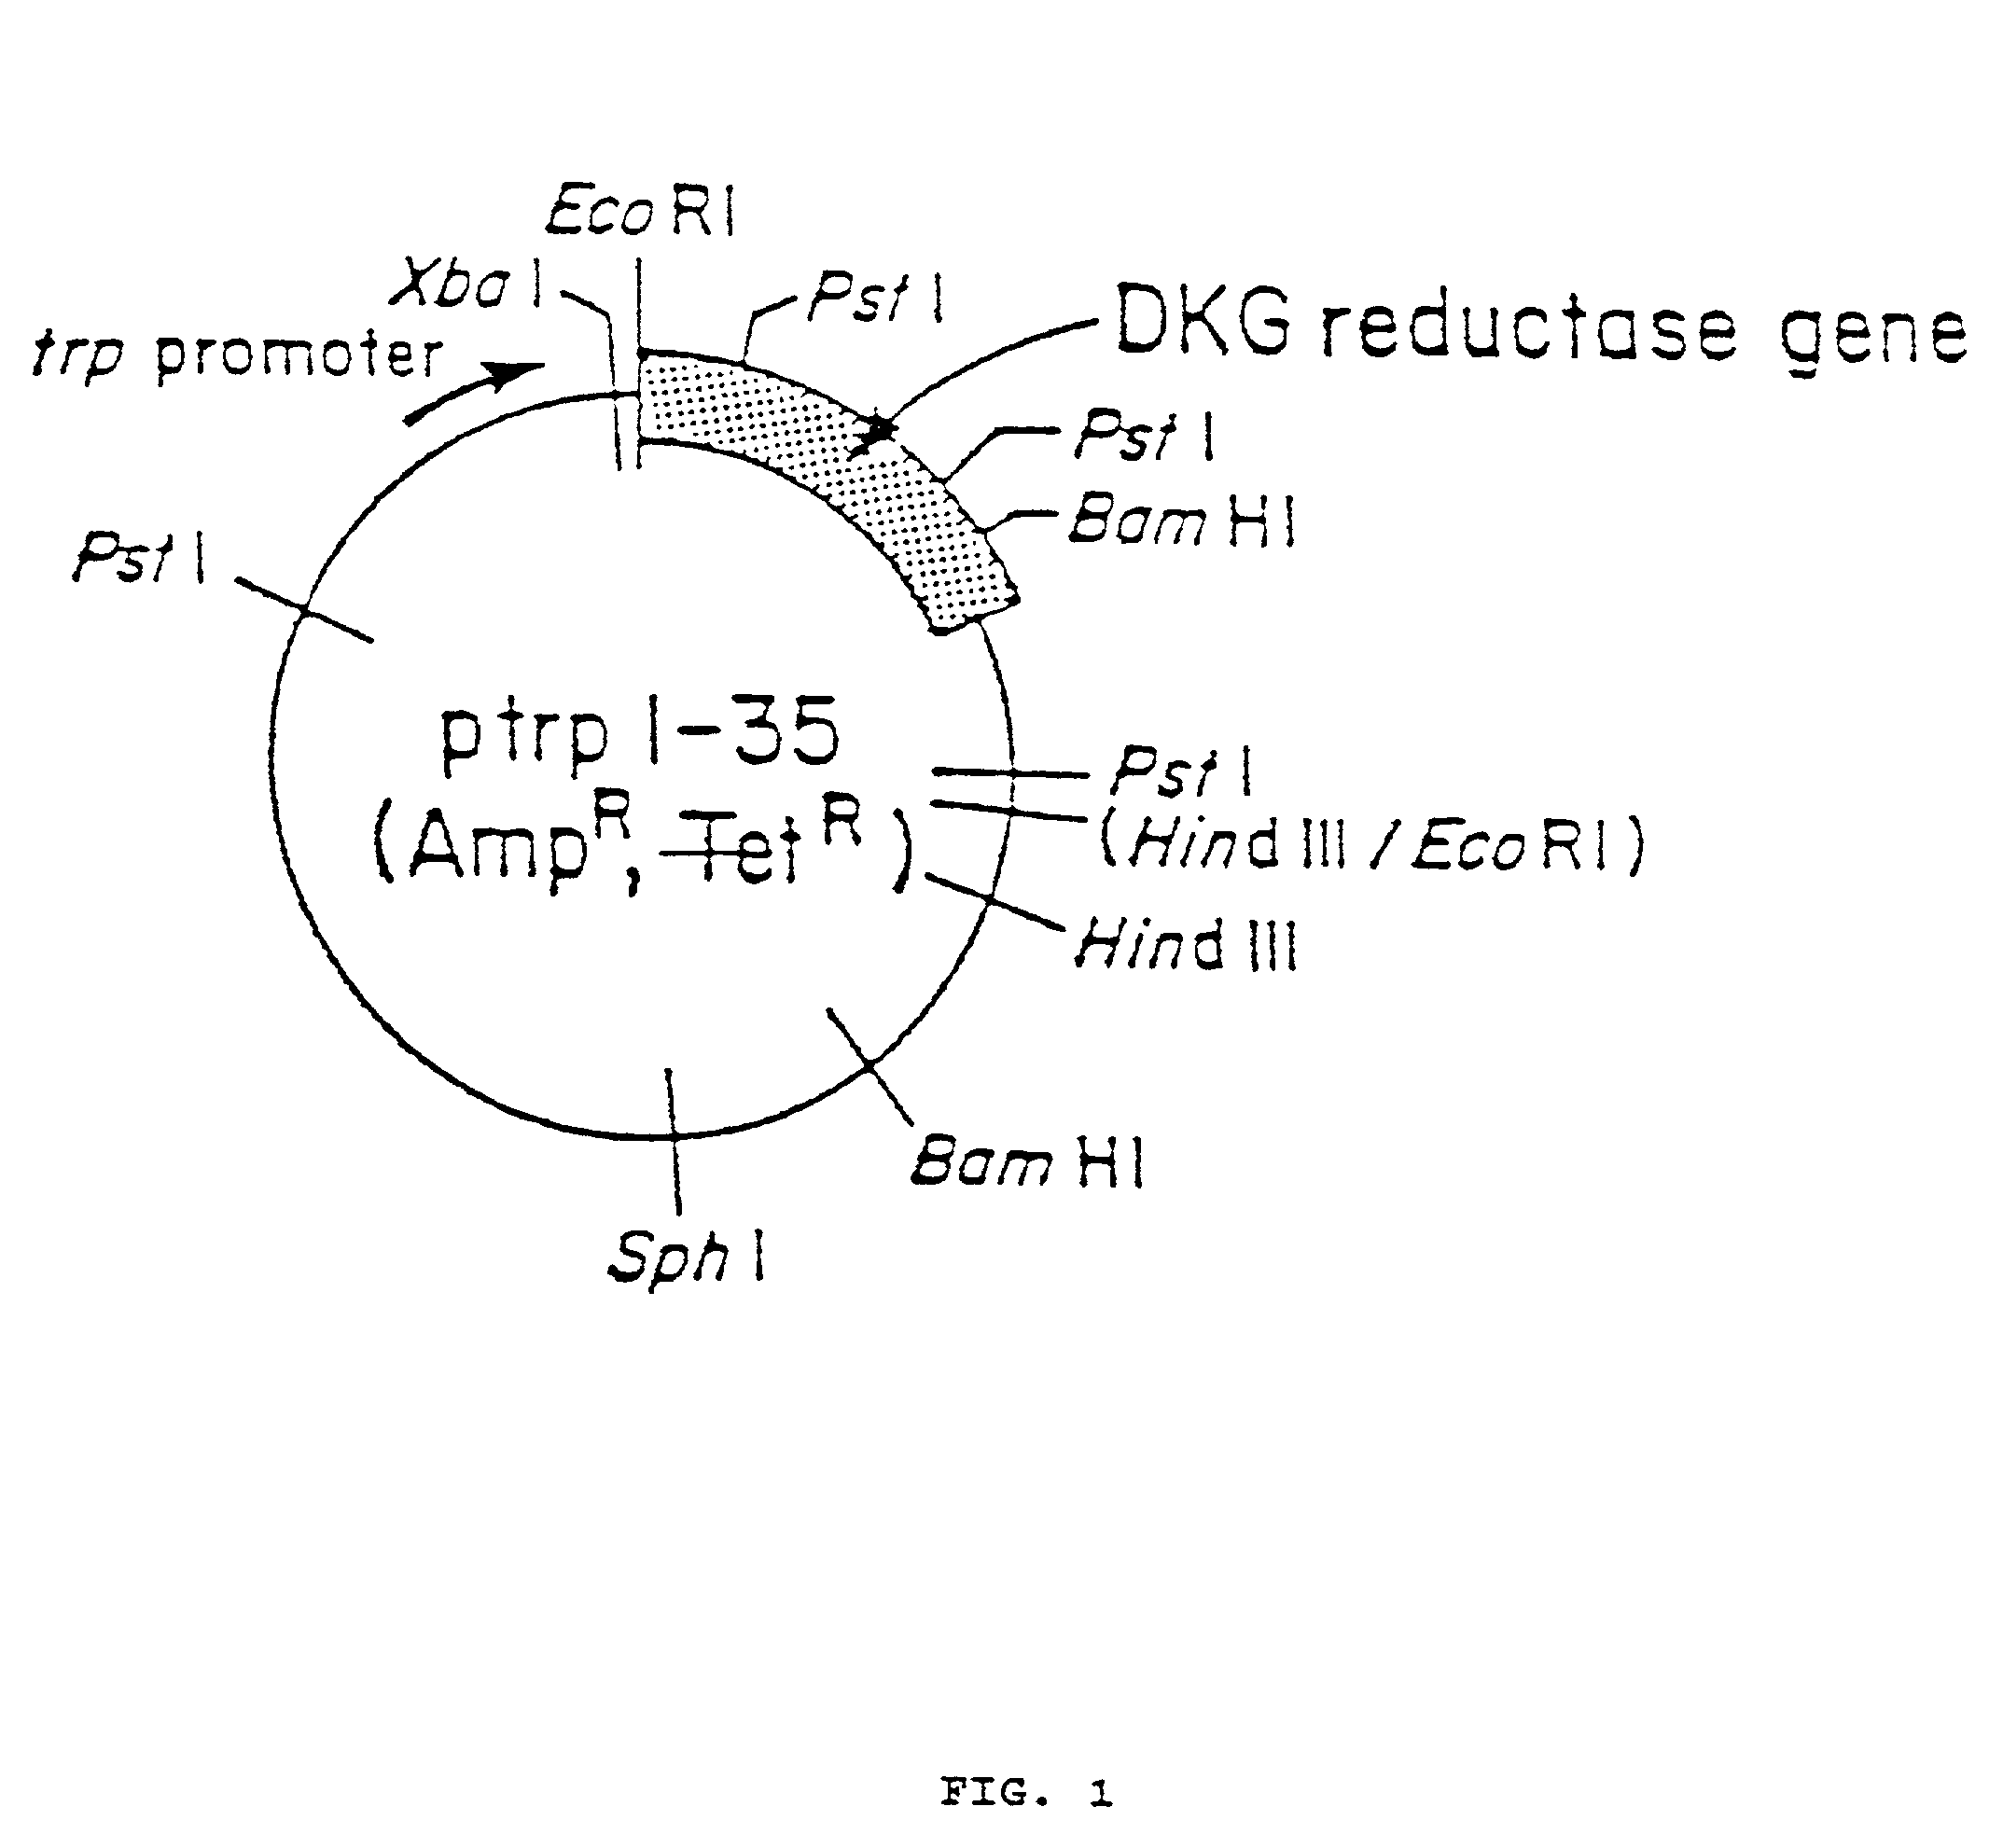 Enzymes for the production of 2-keto-L-gulonic acid